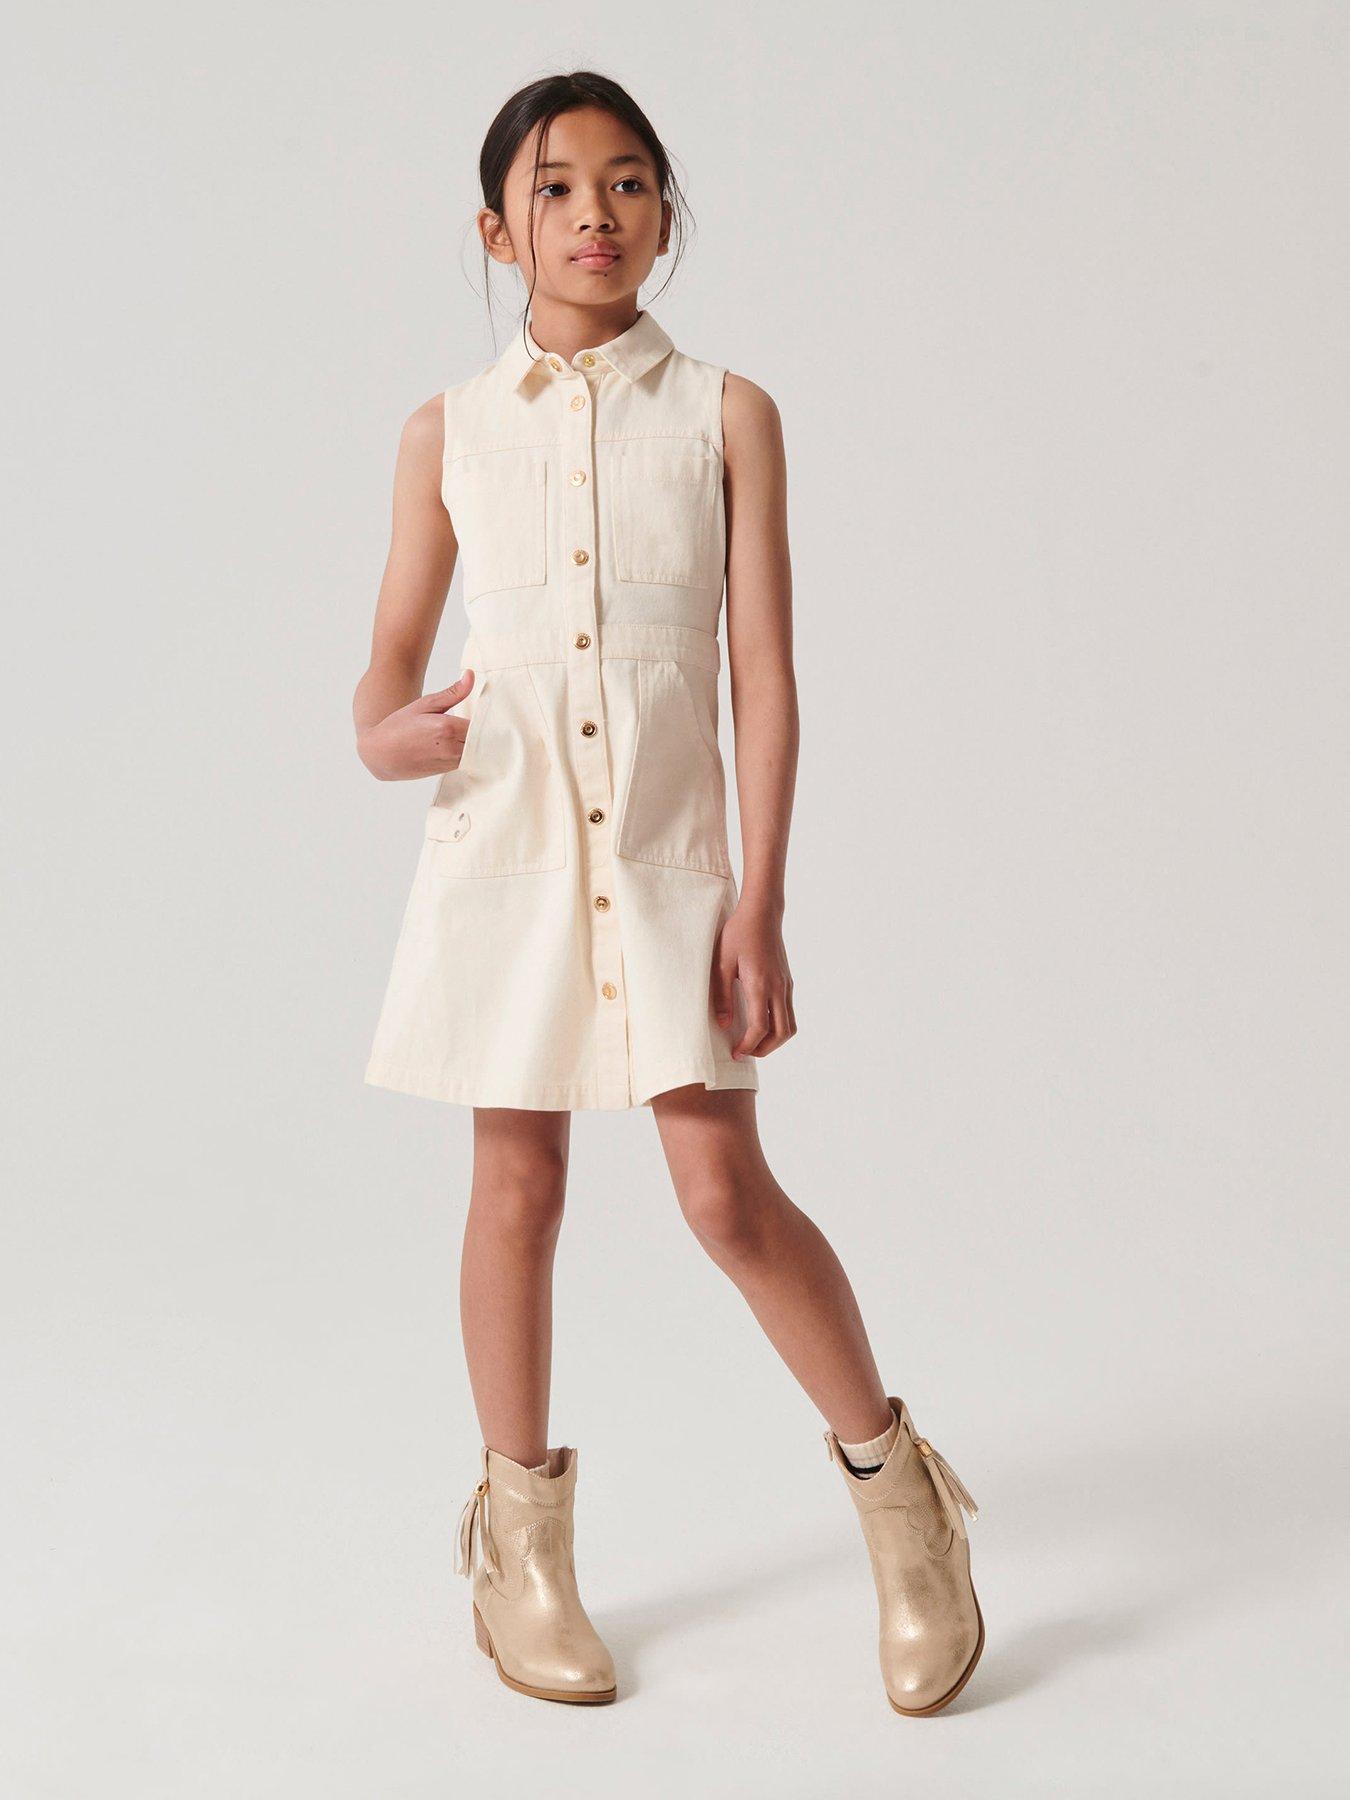 Sailor Collar Knit Graduation Dress For Girls | Autumn/Winter Collection |  Ages 3 12 | Kids Costume 0913 From Musuo05, $20.15 | DHgate.Com